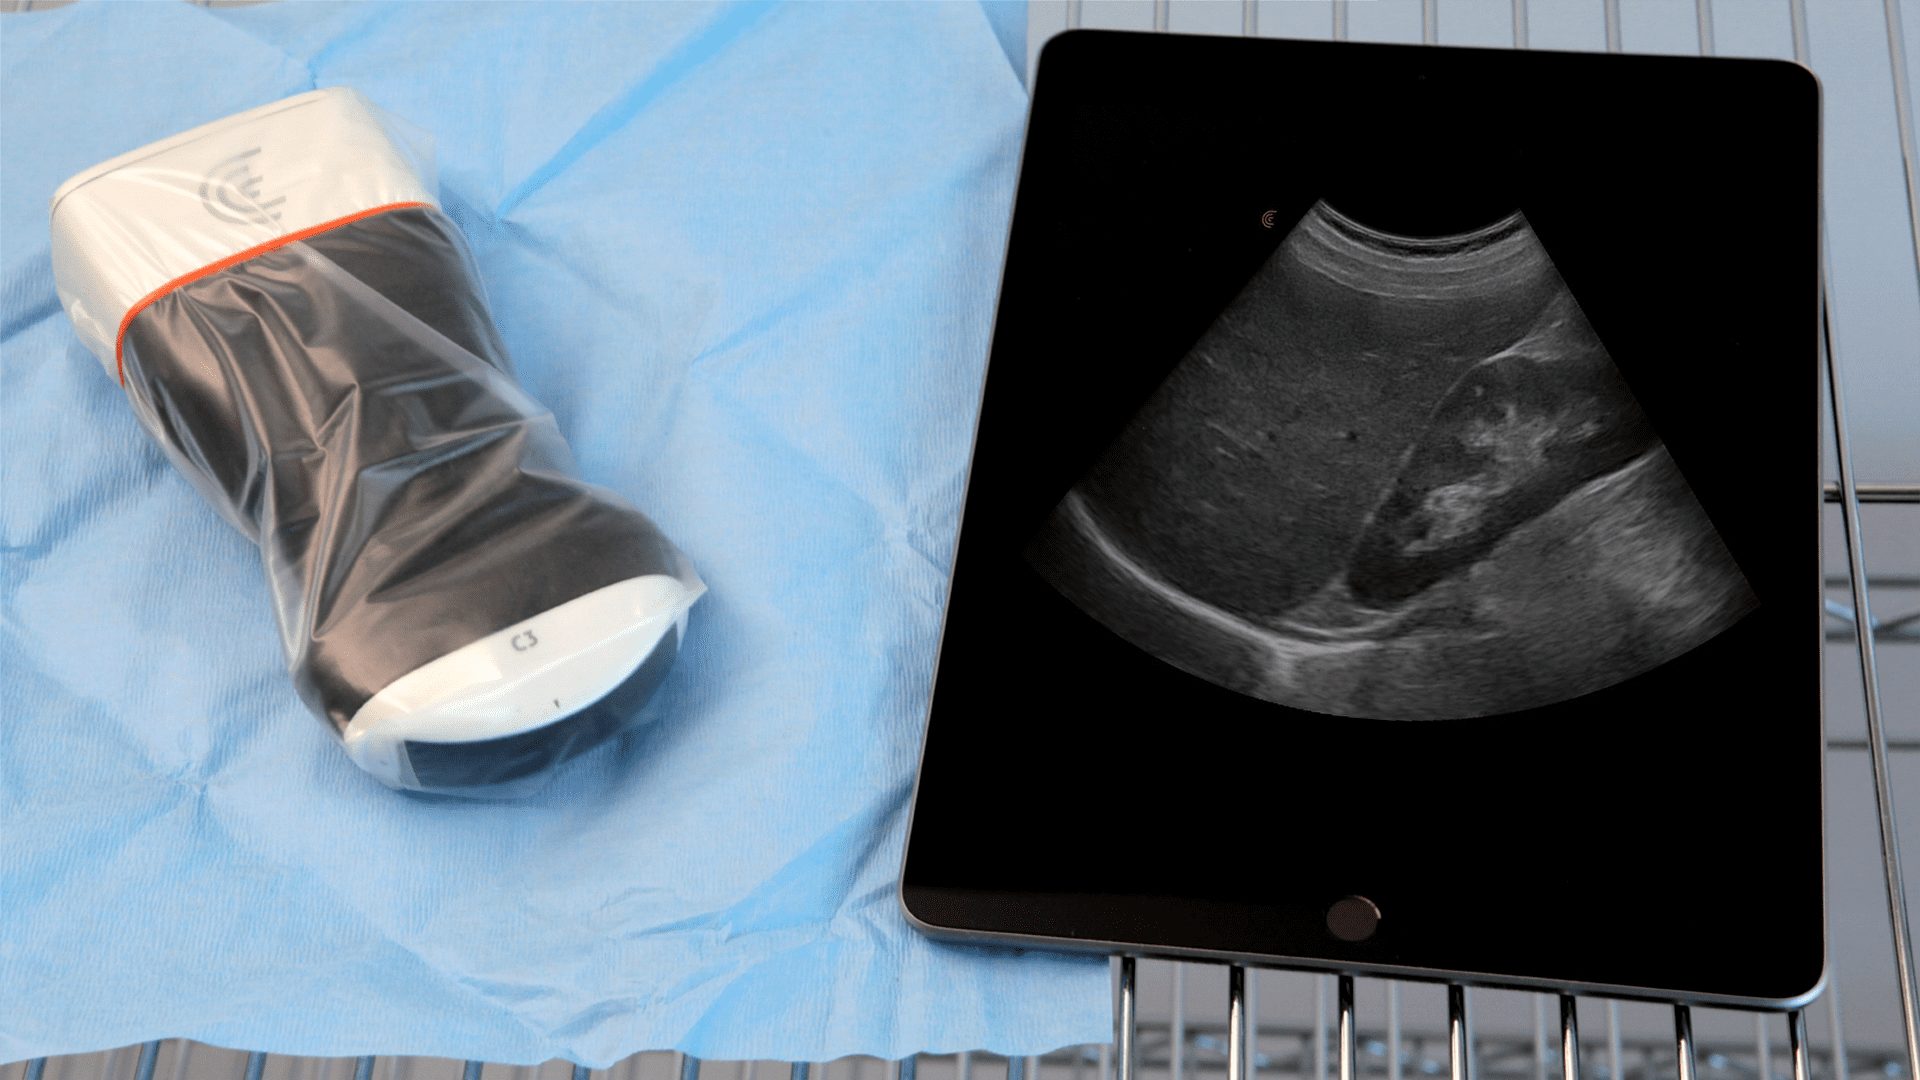 Why Handheld Ultrasound is a Safer Option for Infection Control